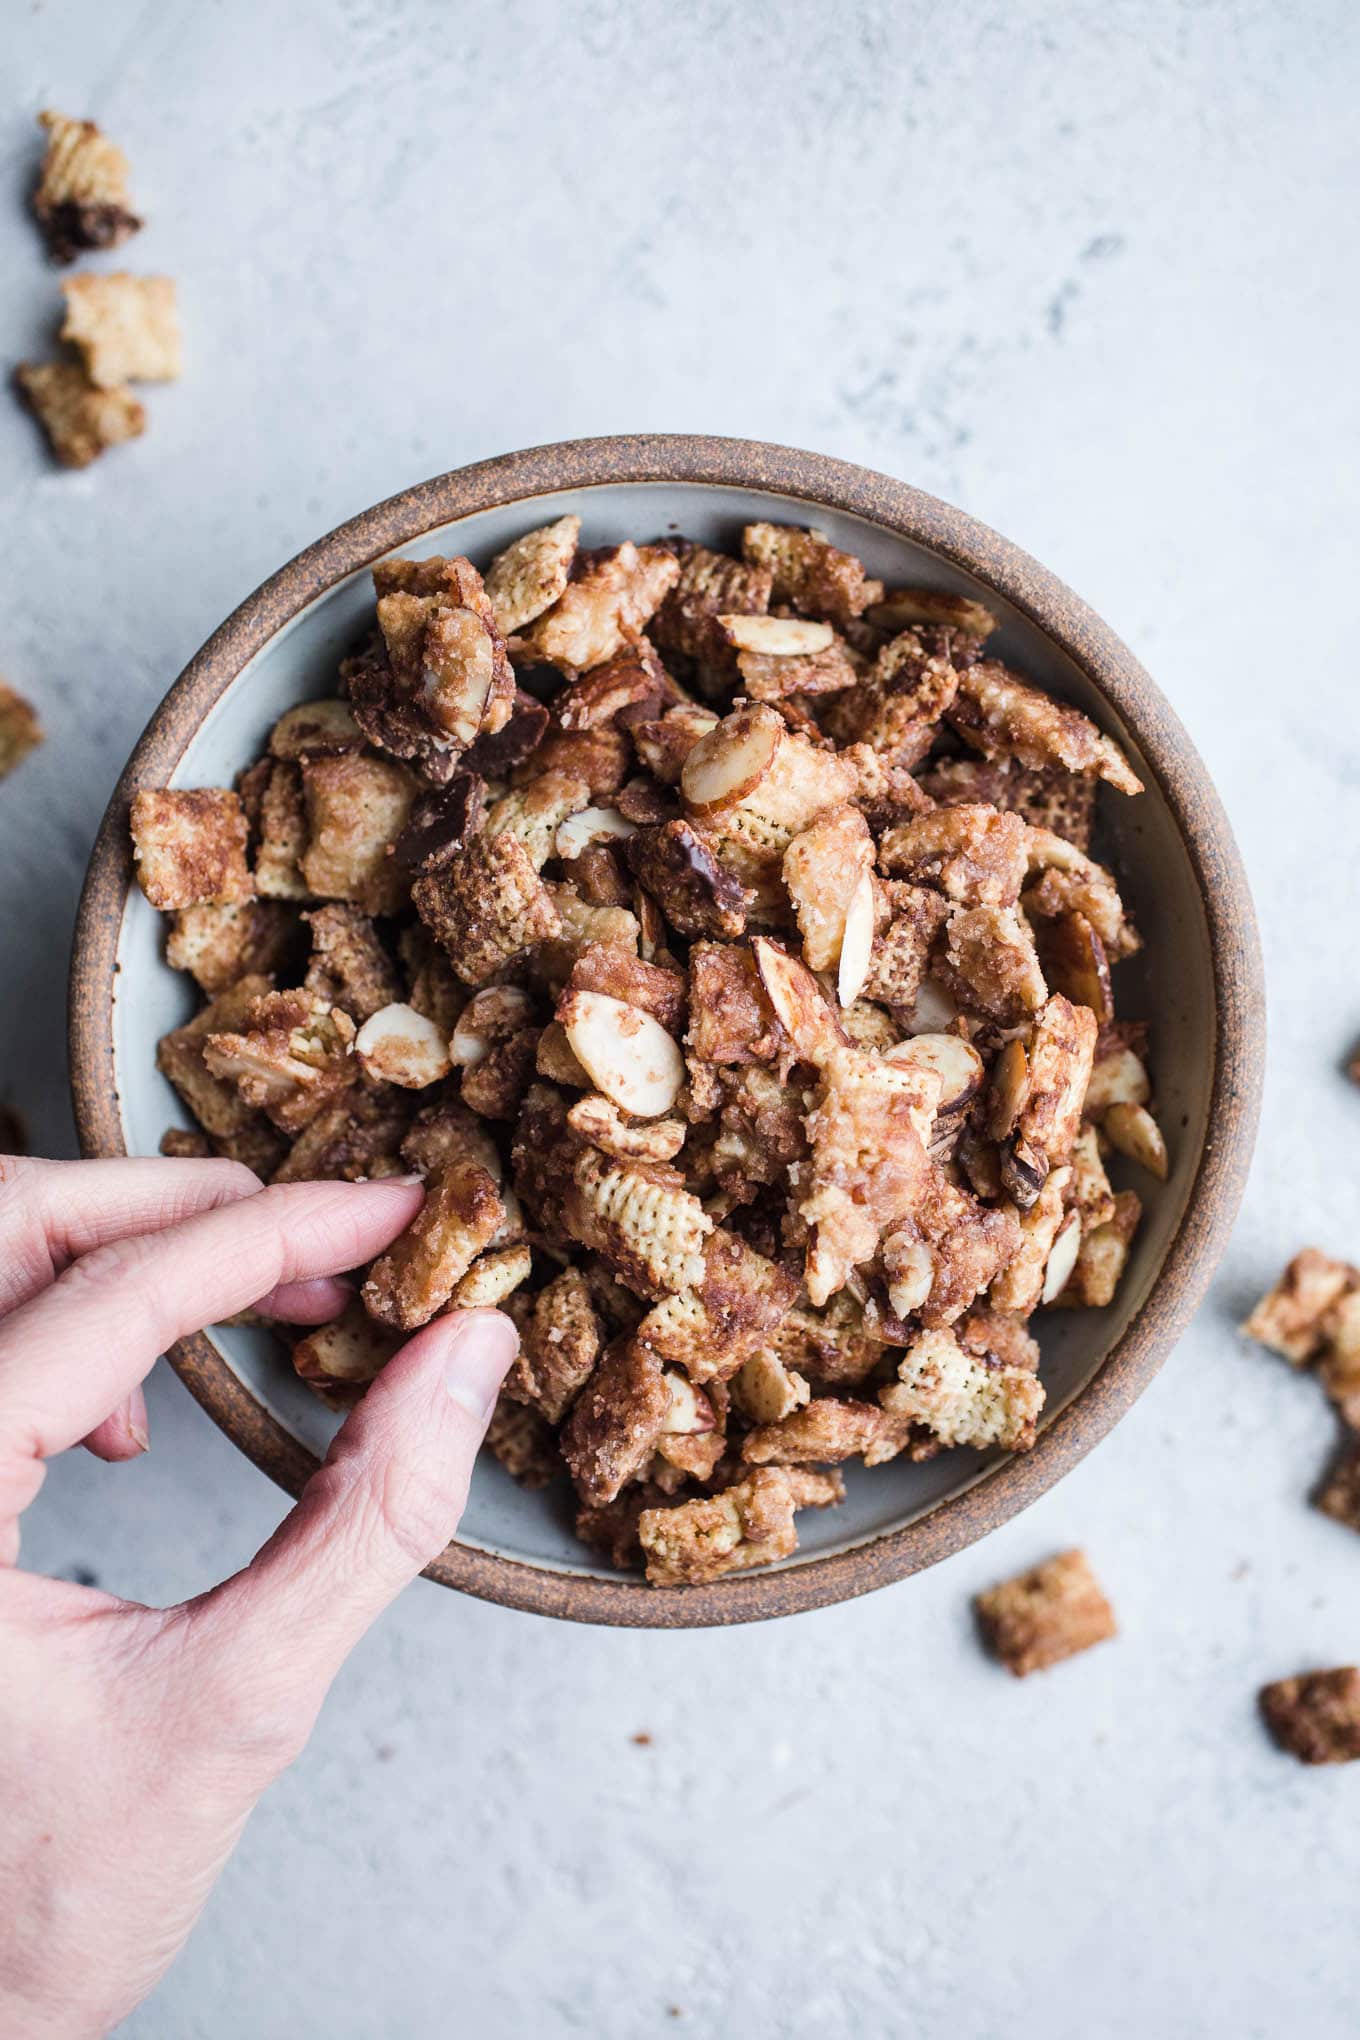 Coconut Chocolate Chex Mix is an easy dairy-free sweet chex mix made with coconut butter and maple syrup. A healthier gluten-free and vegan chex mix recipe!